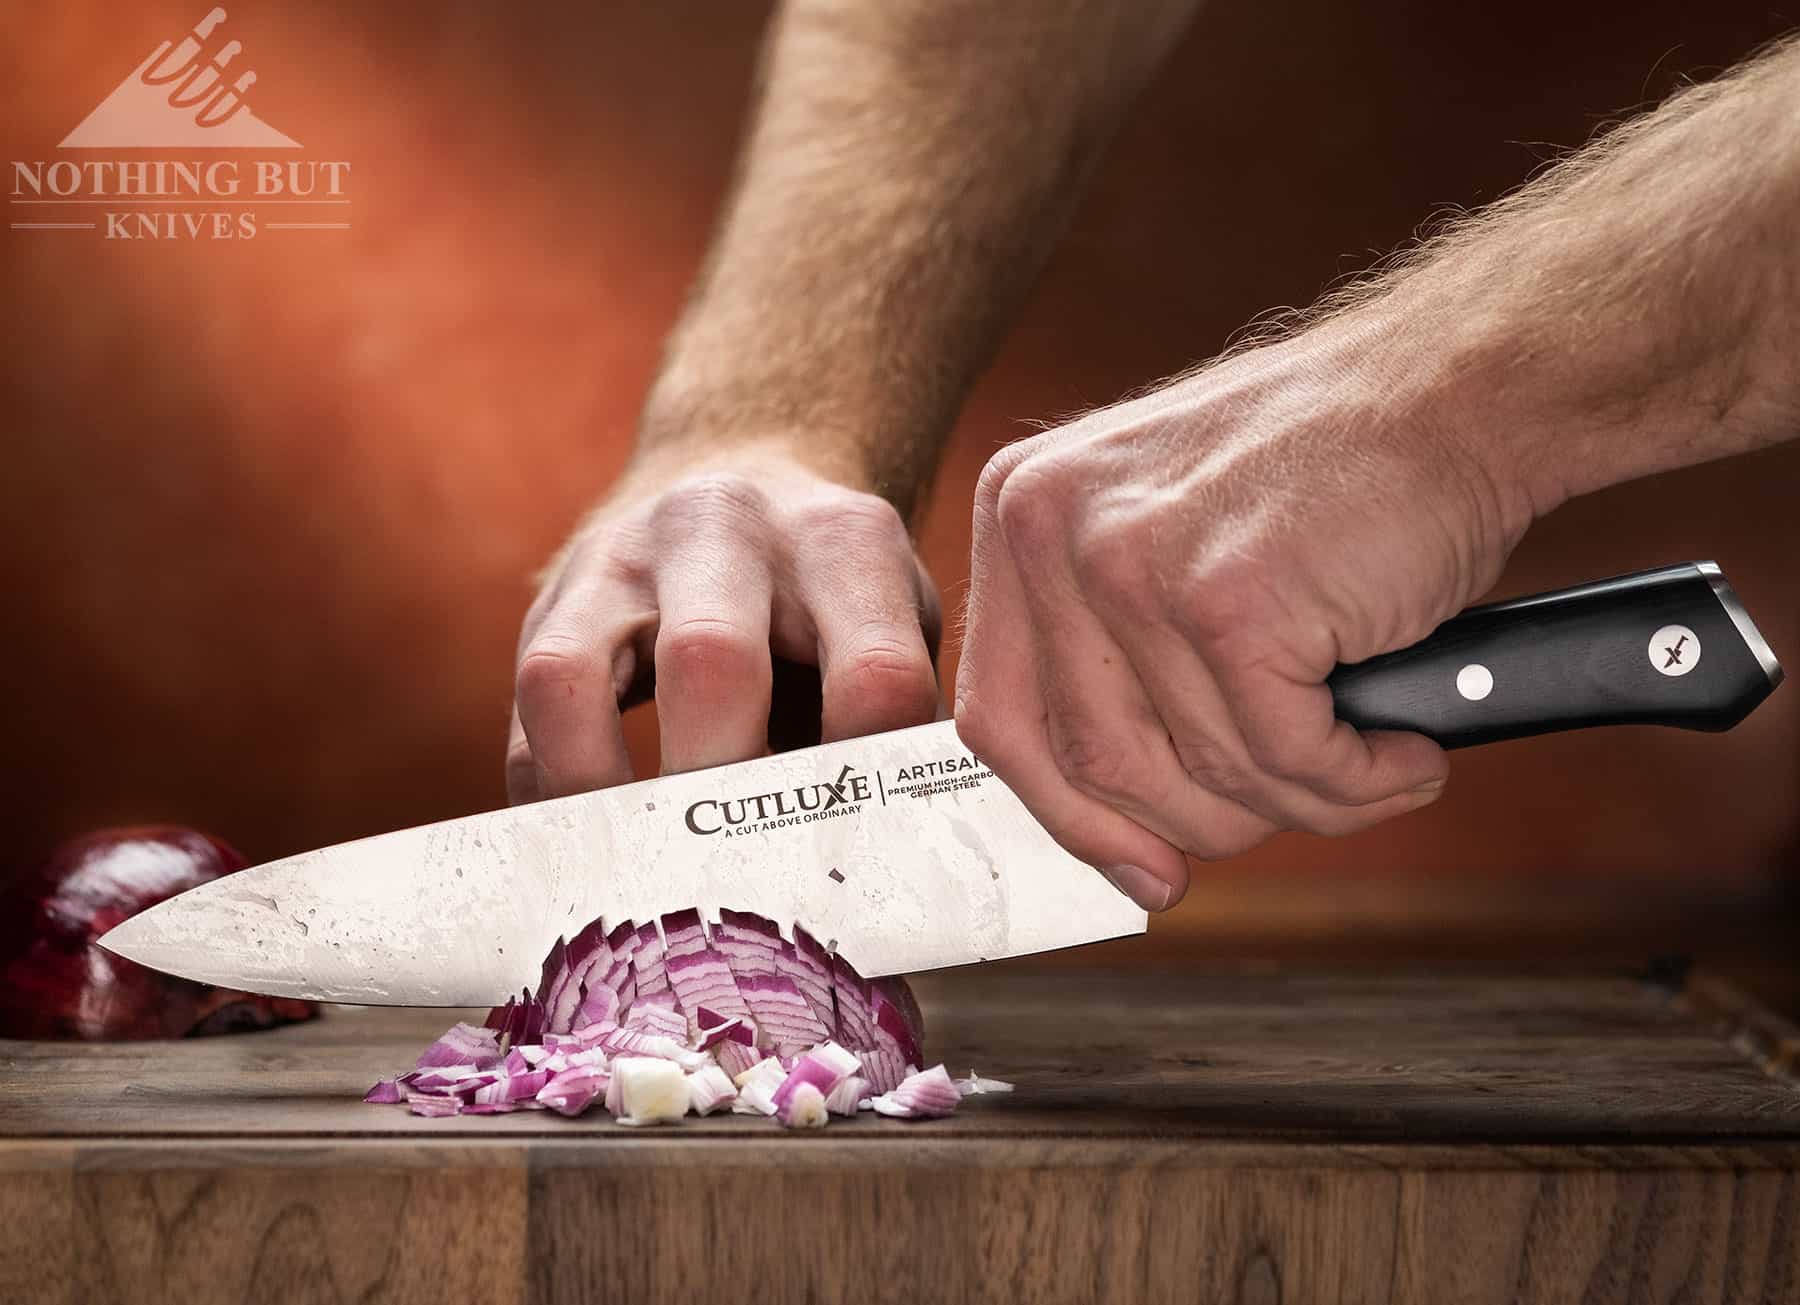 https://www.nothingbutknives.com/wp-content/uploads/2023/01/Dicing-Onions-with-a-Cutluxe-Artisan-Chef-Knife.jpg